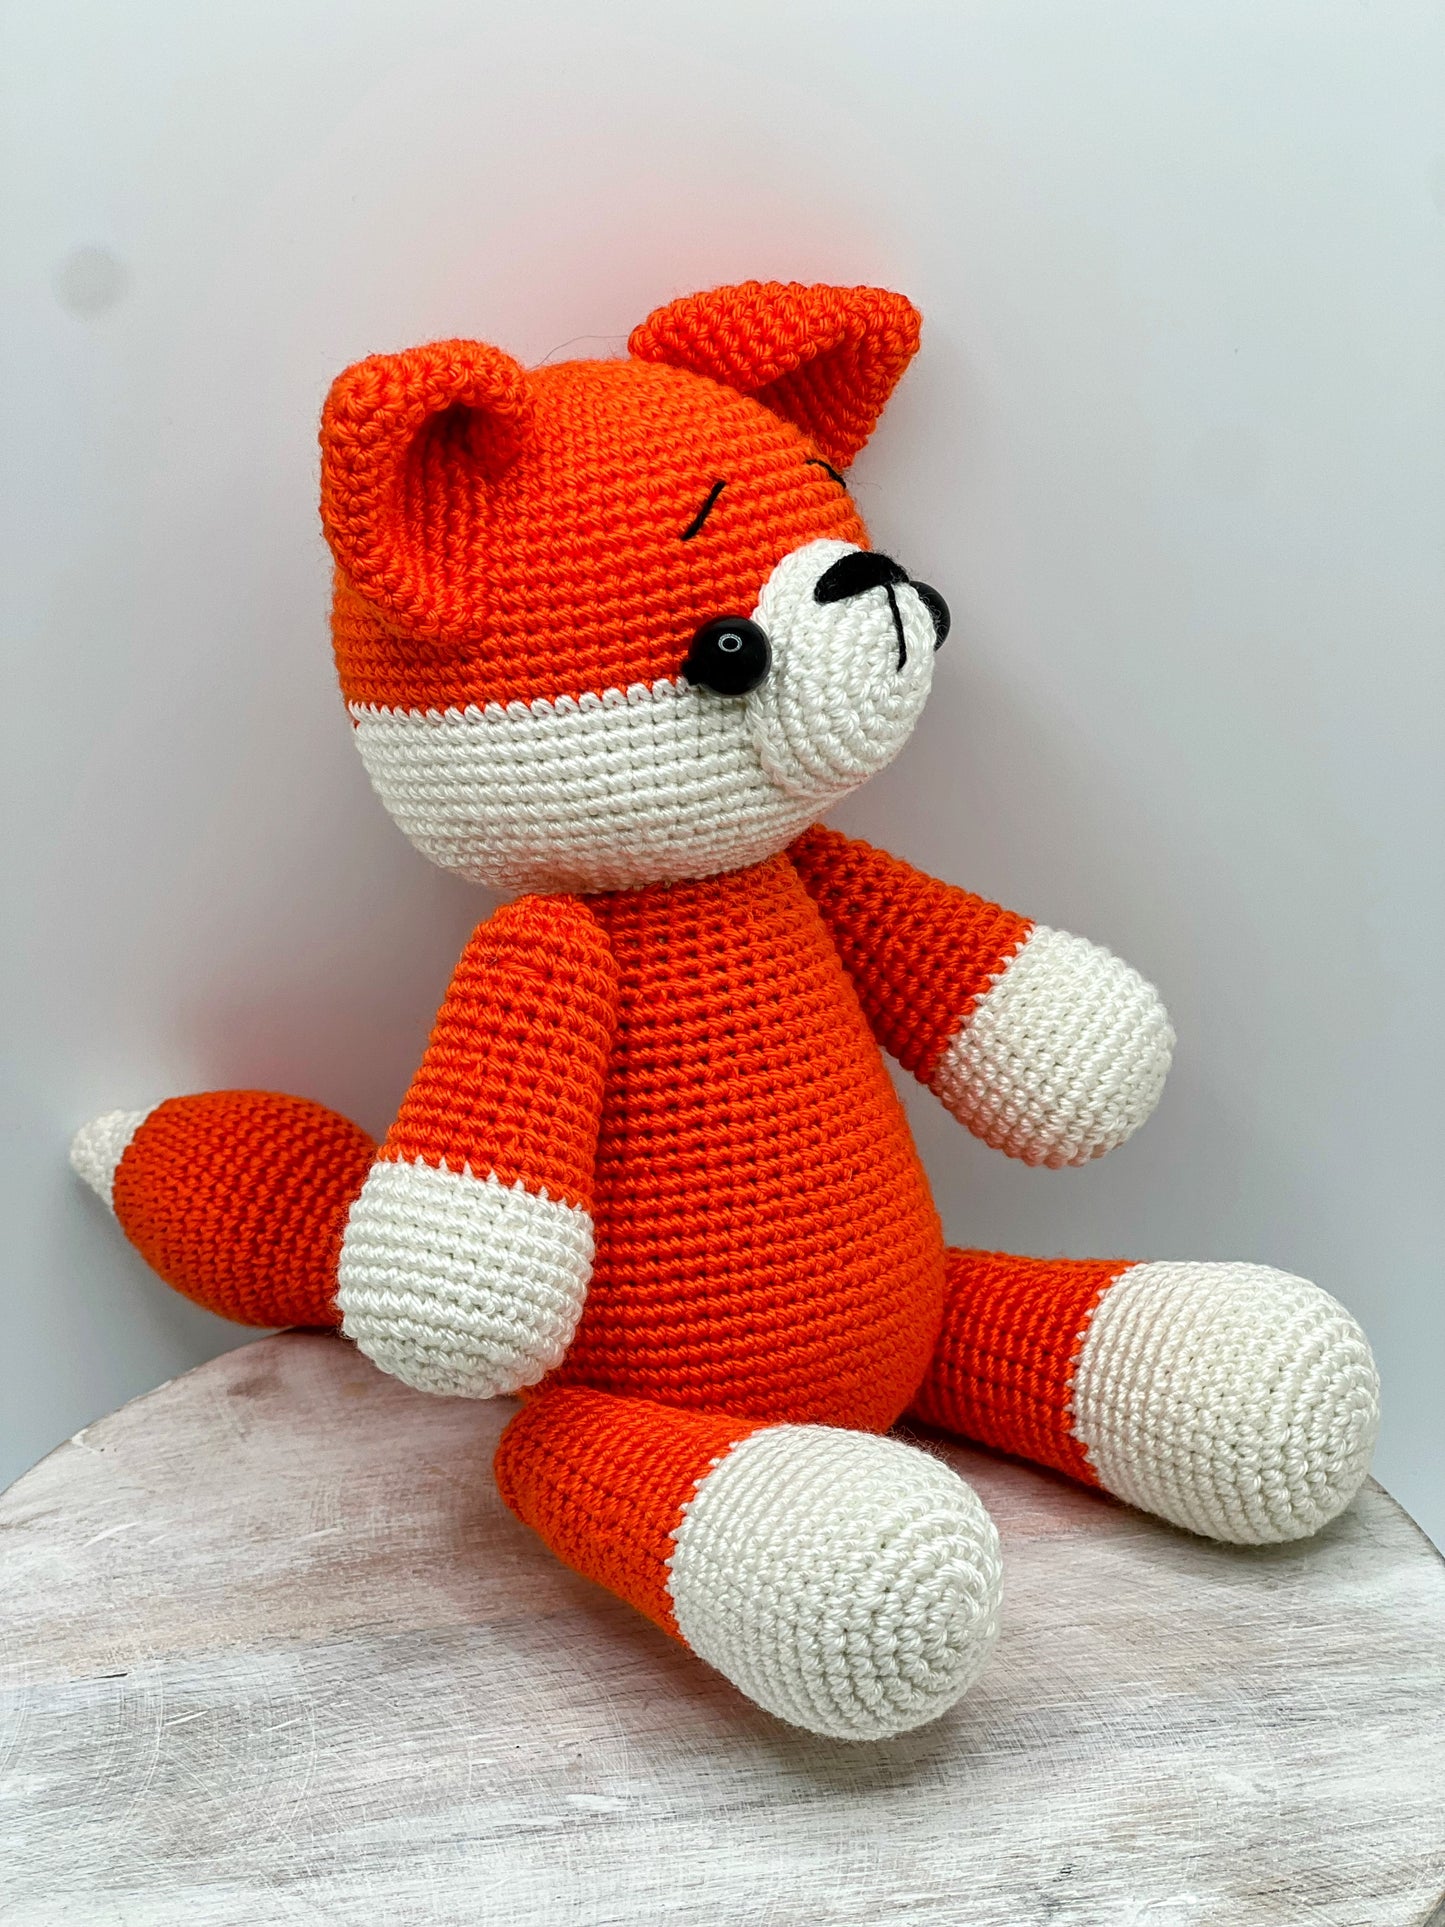 Stuffed Fox Toy With Moving Legs - Crochet Knitted Amigurumi Toy